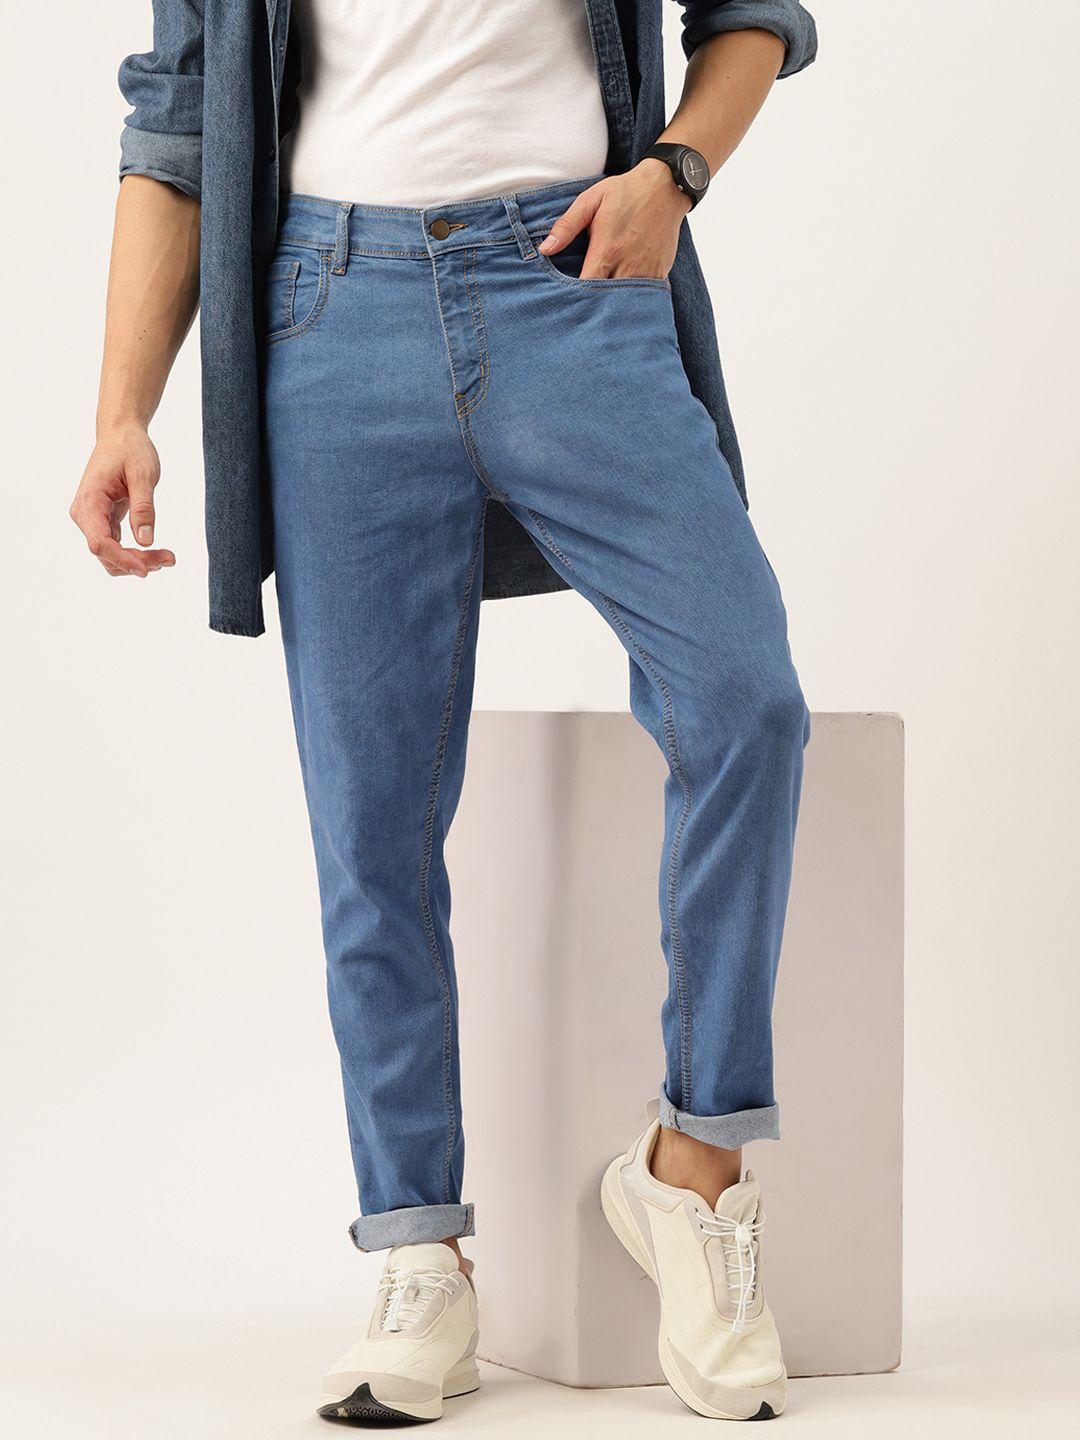 kook n keech men tapered fit stretchable jeans